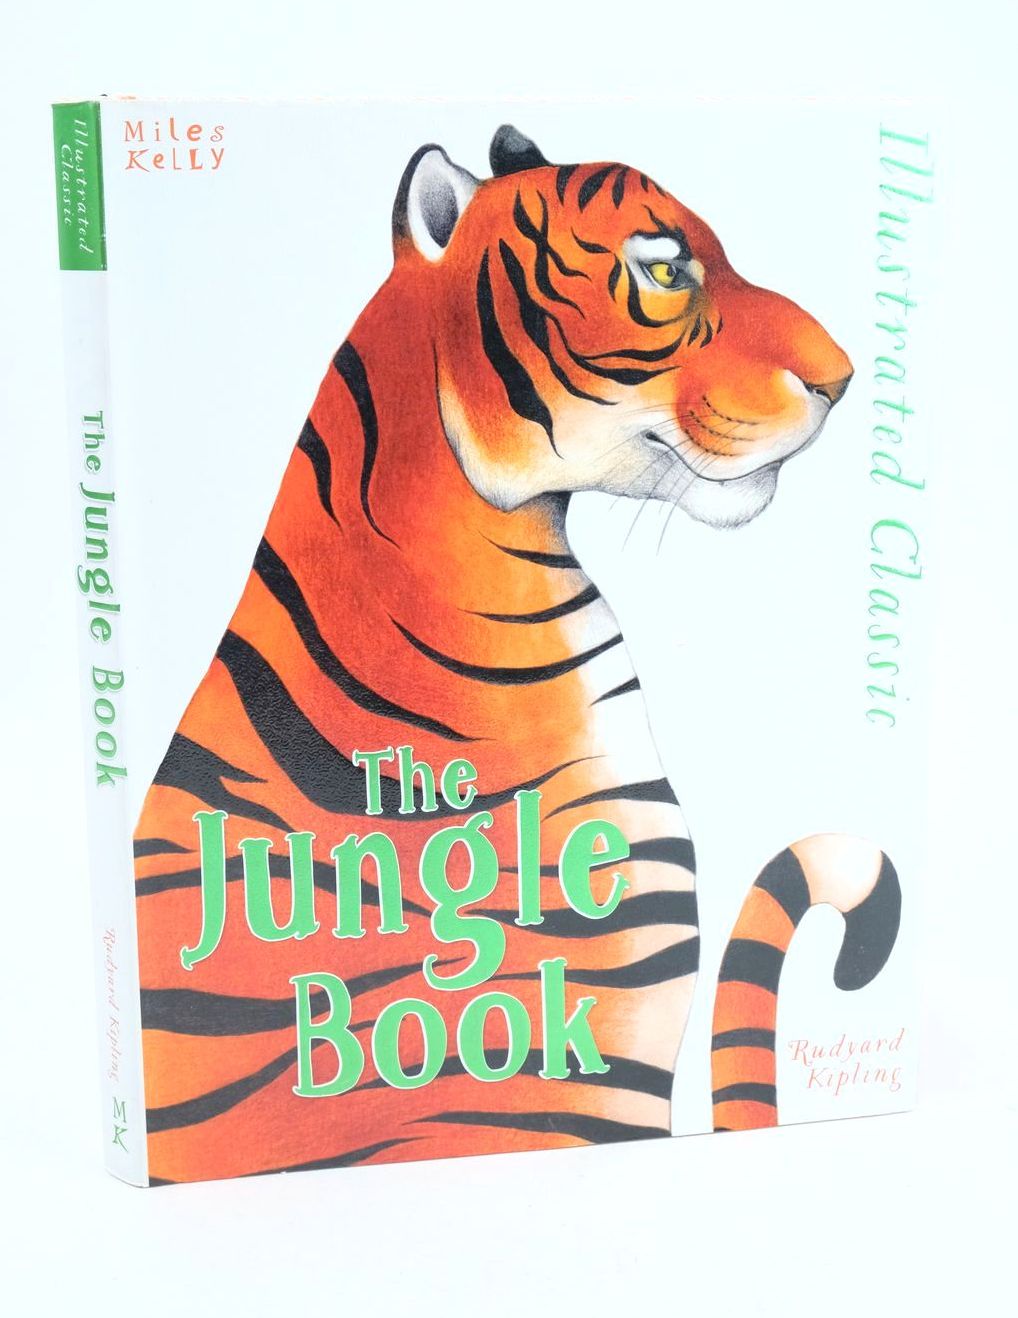 Photo of THE JUNGLE BOOK written by Kipling, Rudyard illustrated by Cortes, Ester Garcia published by Miles Kelly Publishing Ltd. (STOCK CODE: 1325611)  for sale by Stella & Rose's Books